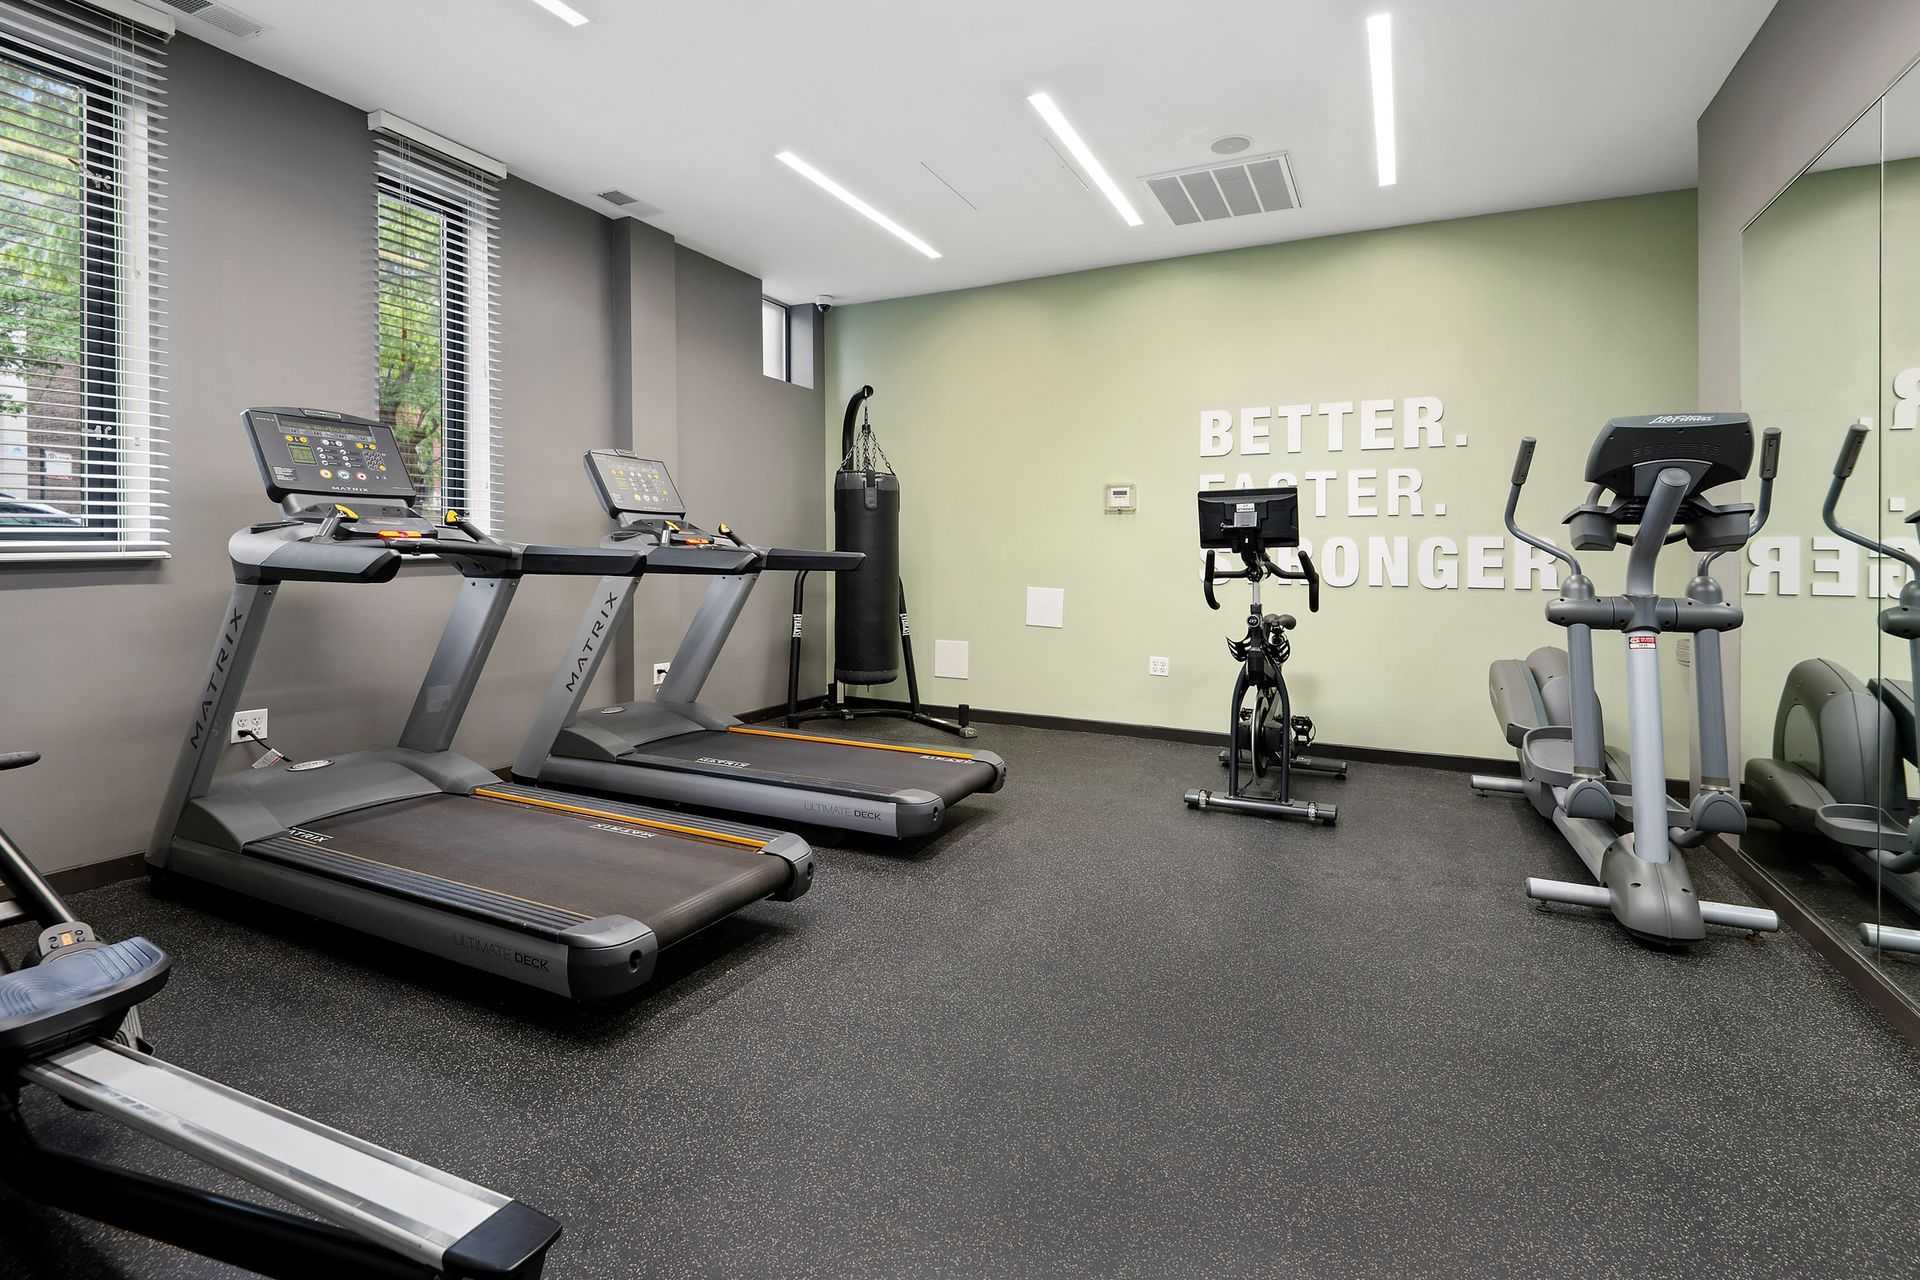 A gym with treadmills , exercise bikes , and a wall that says better at Reside on Clarendon.